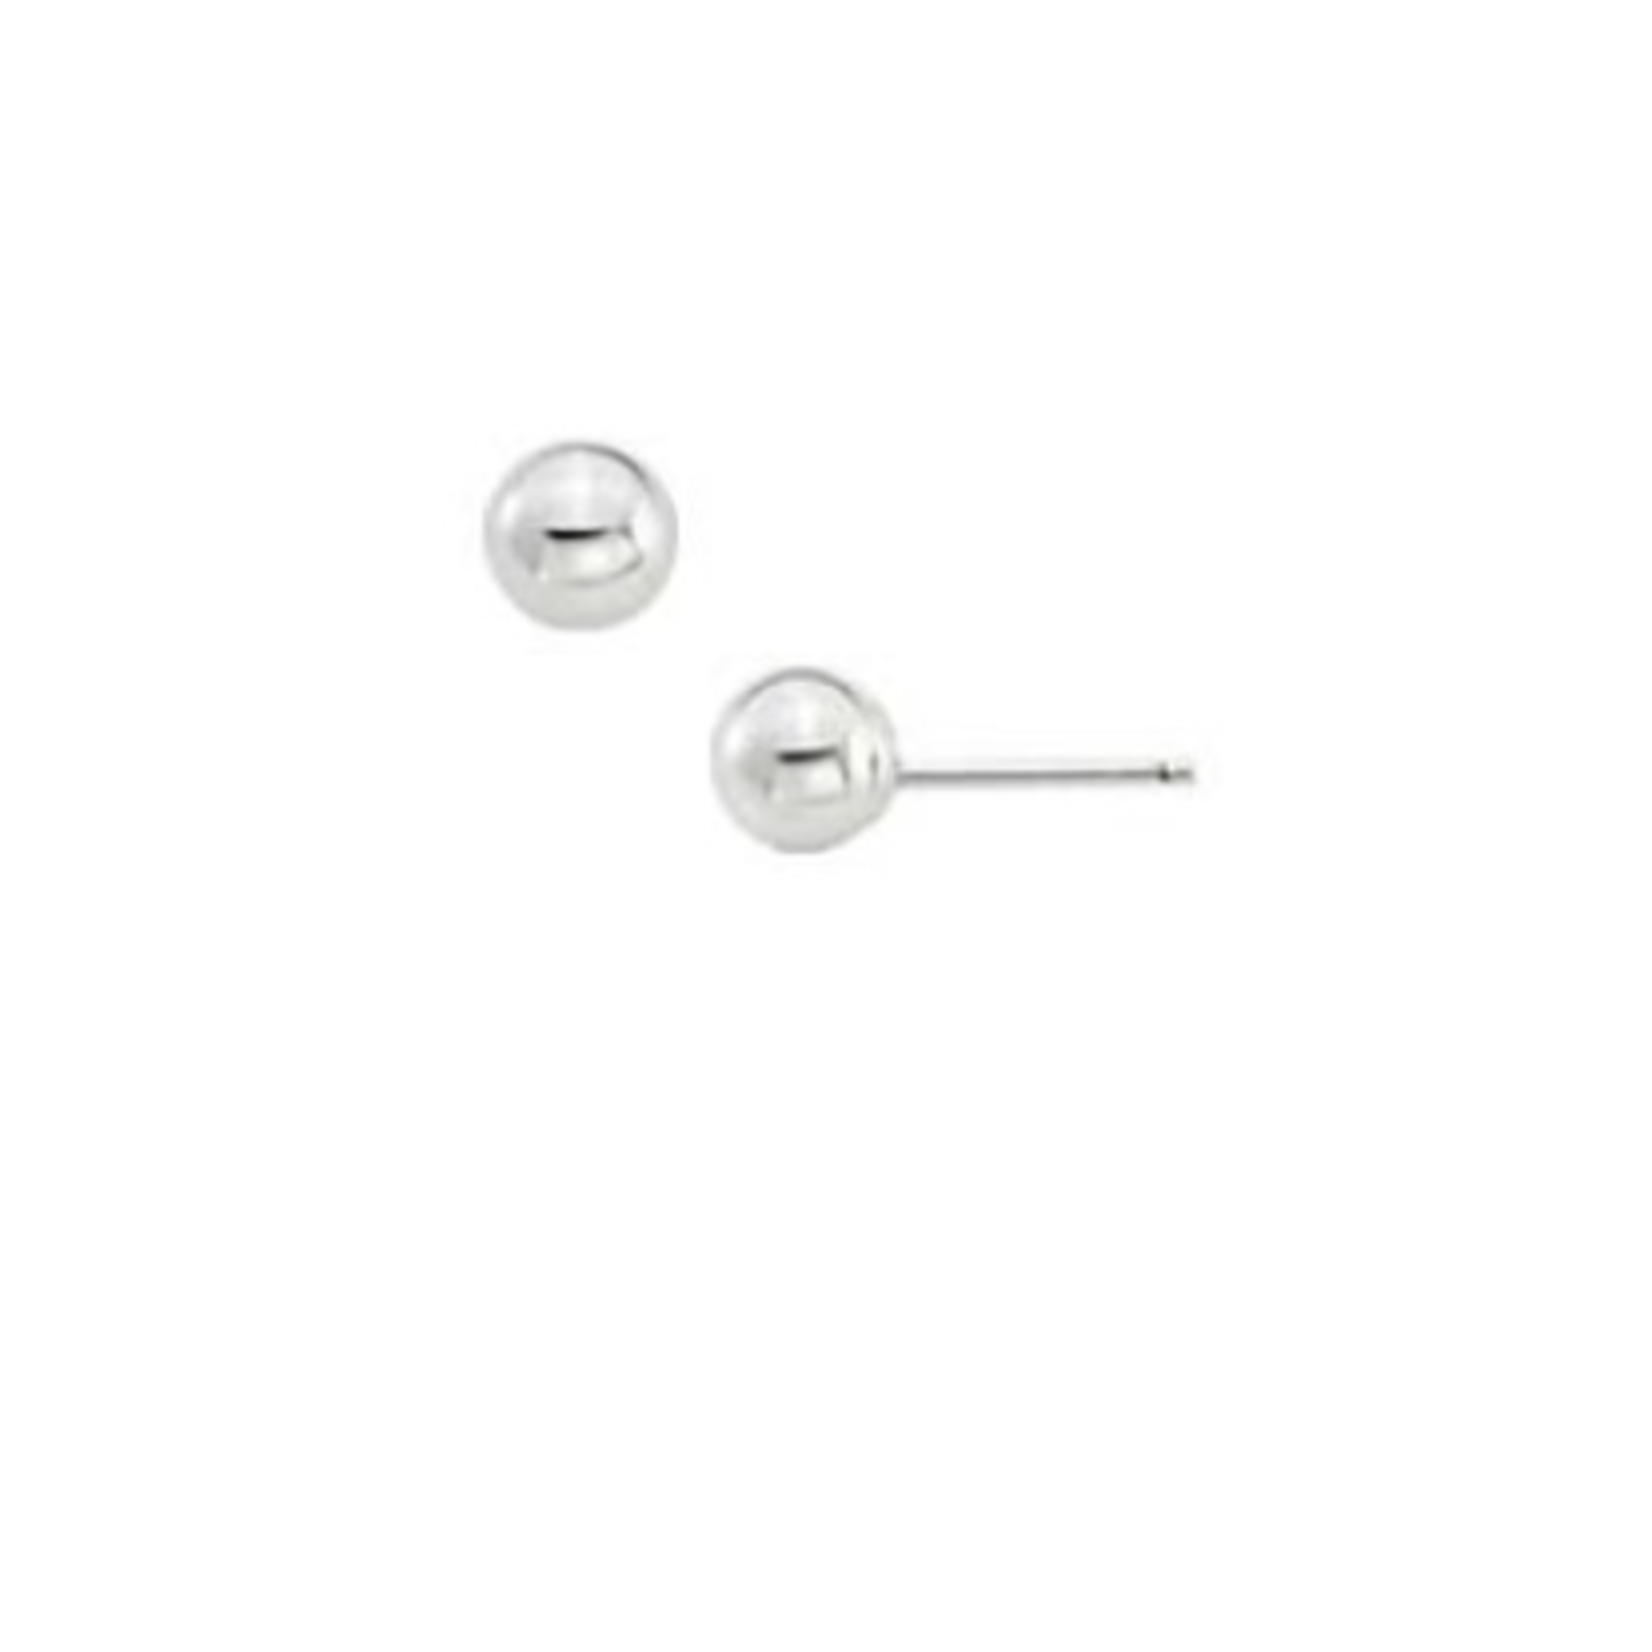 Aimee by Pastore - Ball 5MM Earring Studs